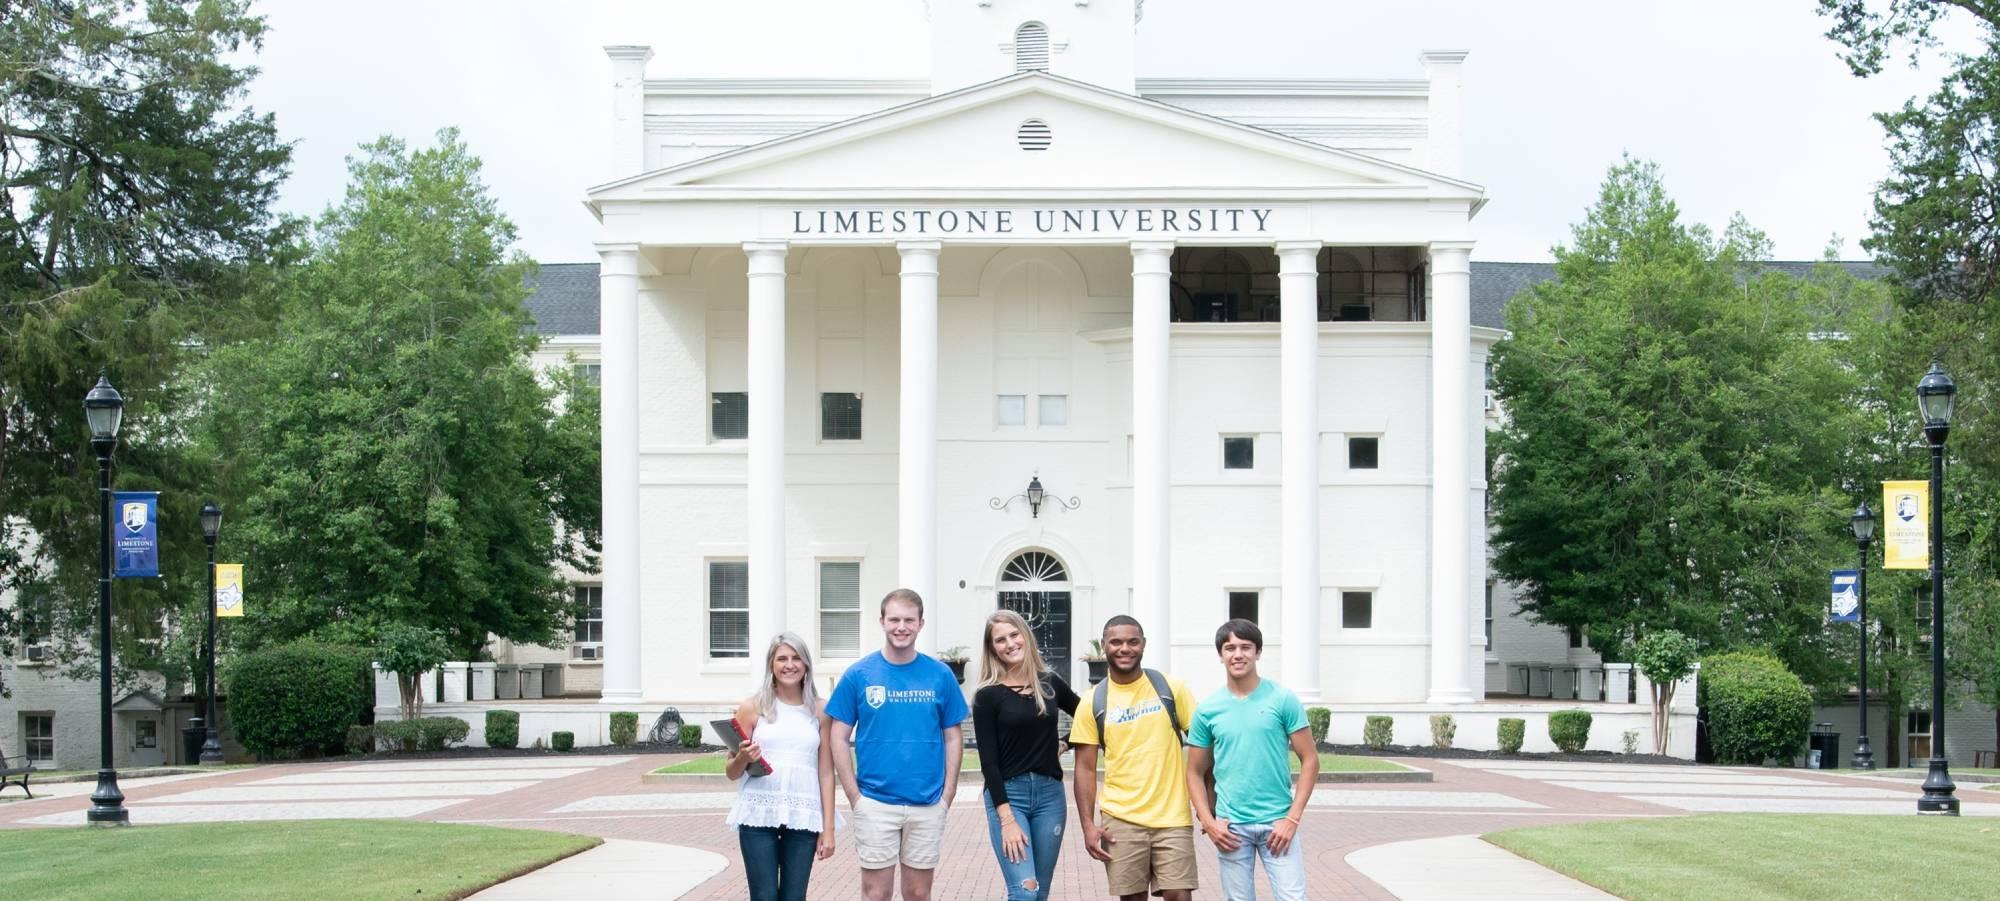 Five smiling college students standing in front of school entrance.